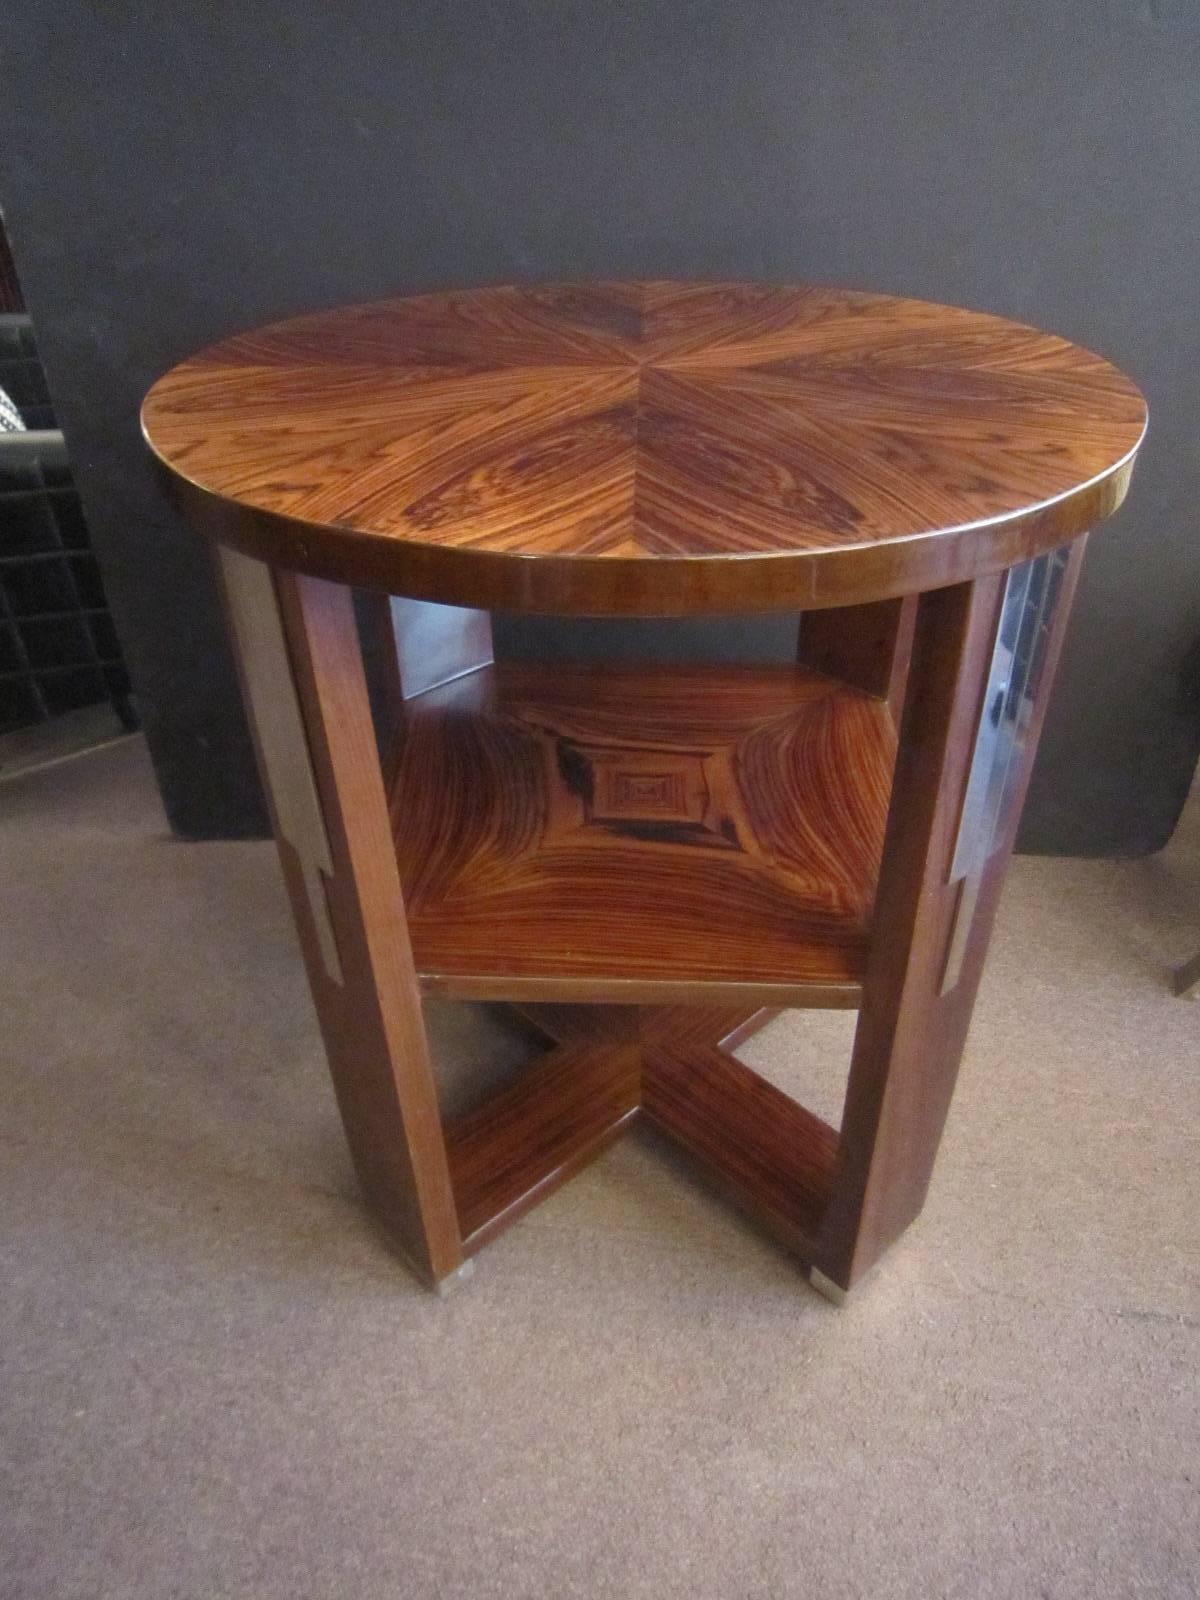 An original and unique French modernist highly figured and inlaid side table featuring round top with square stretcher shelf. The bookmatched rosewood inlay displays it's specimen quality in heart shaped and star patterns. The legs are highly